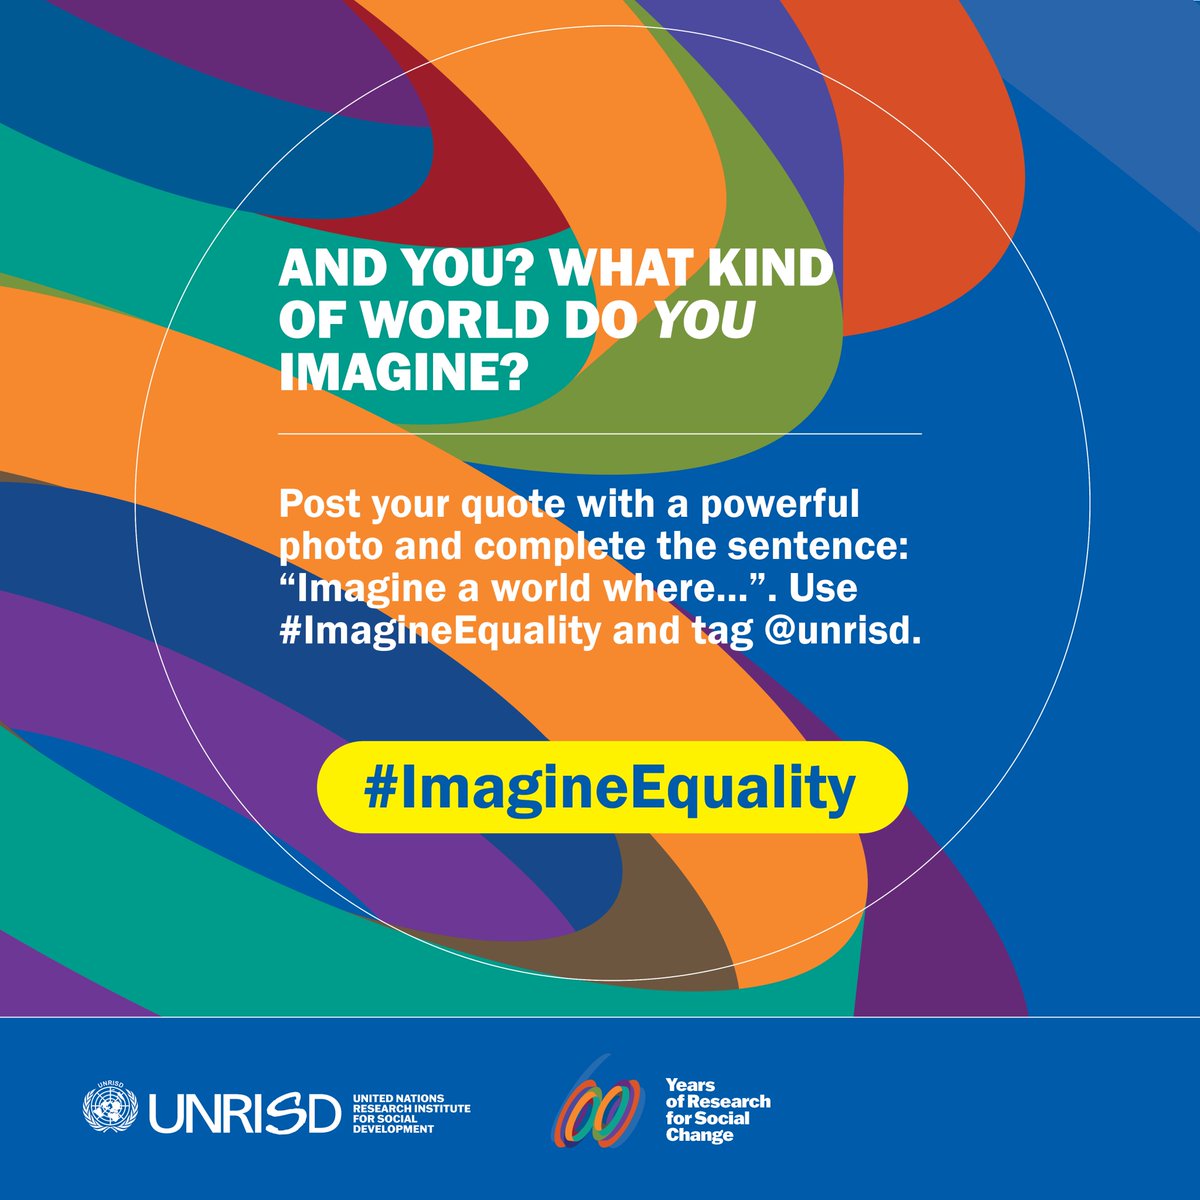 #ImagineEquality: @ILO's DG @GilbertFHoungbo reflects on how labour rights and #SocialJustice must go hand-in-hand when imagining a better world for all. This world is possible when governments, workers and employers work together. #SocialJusticeDay